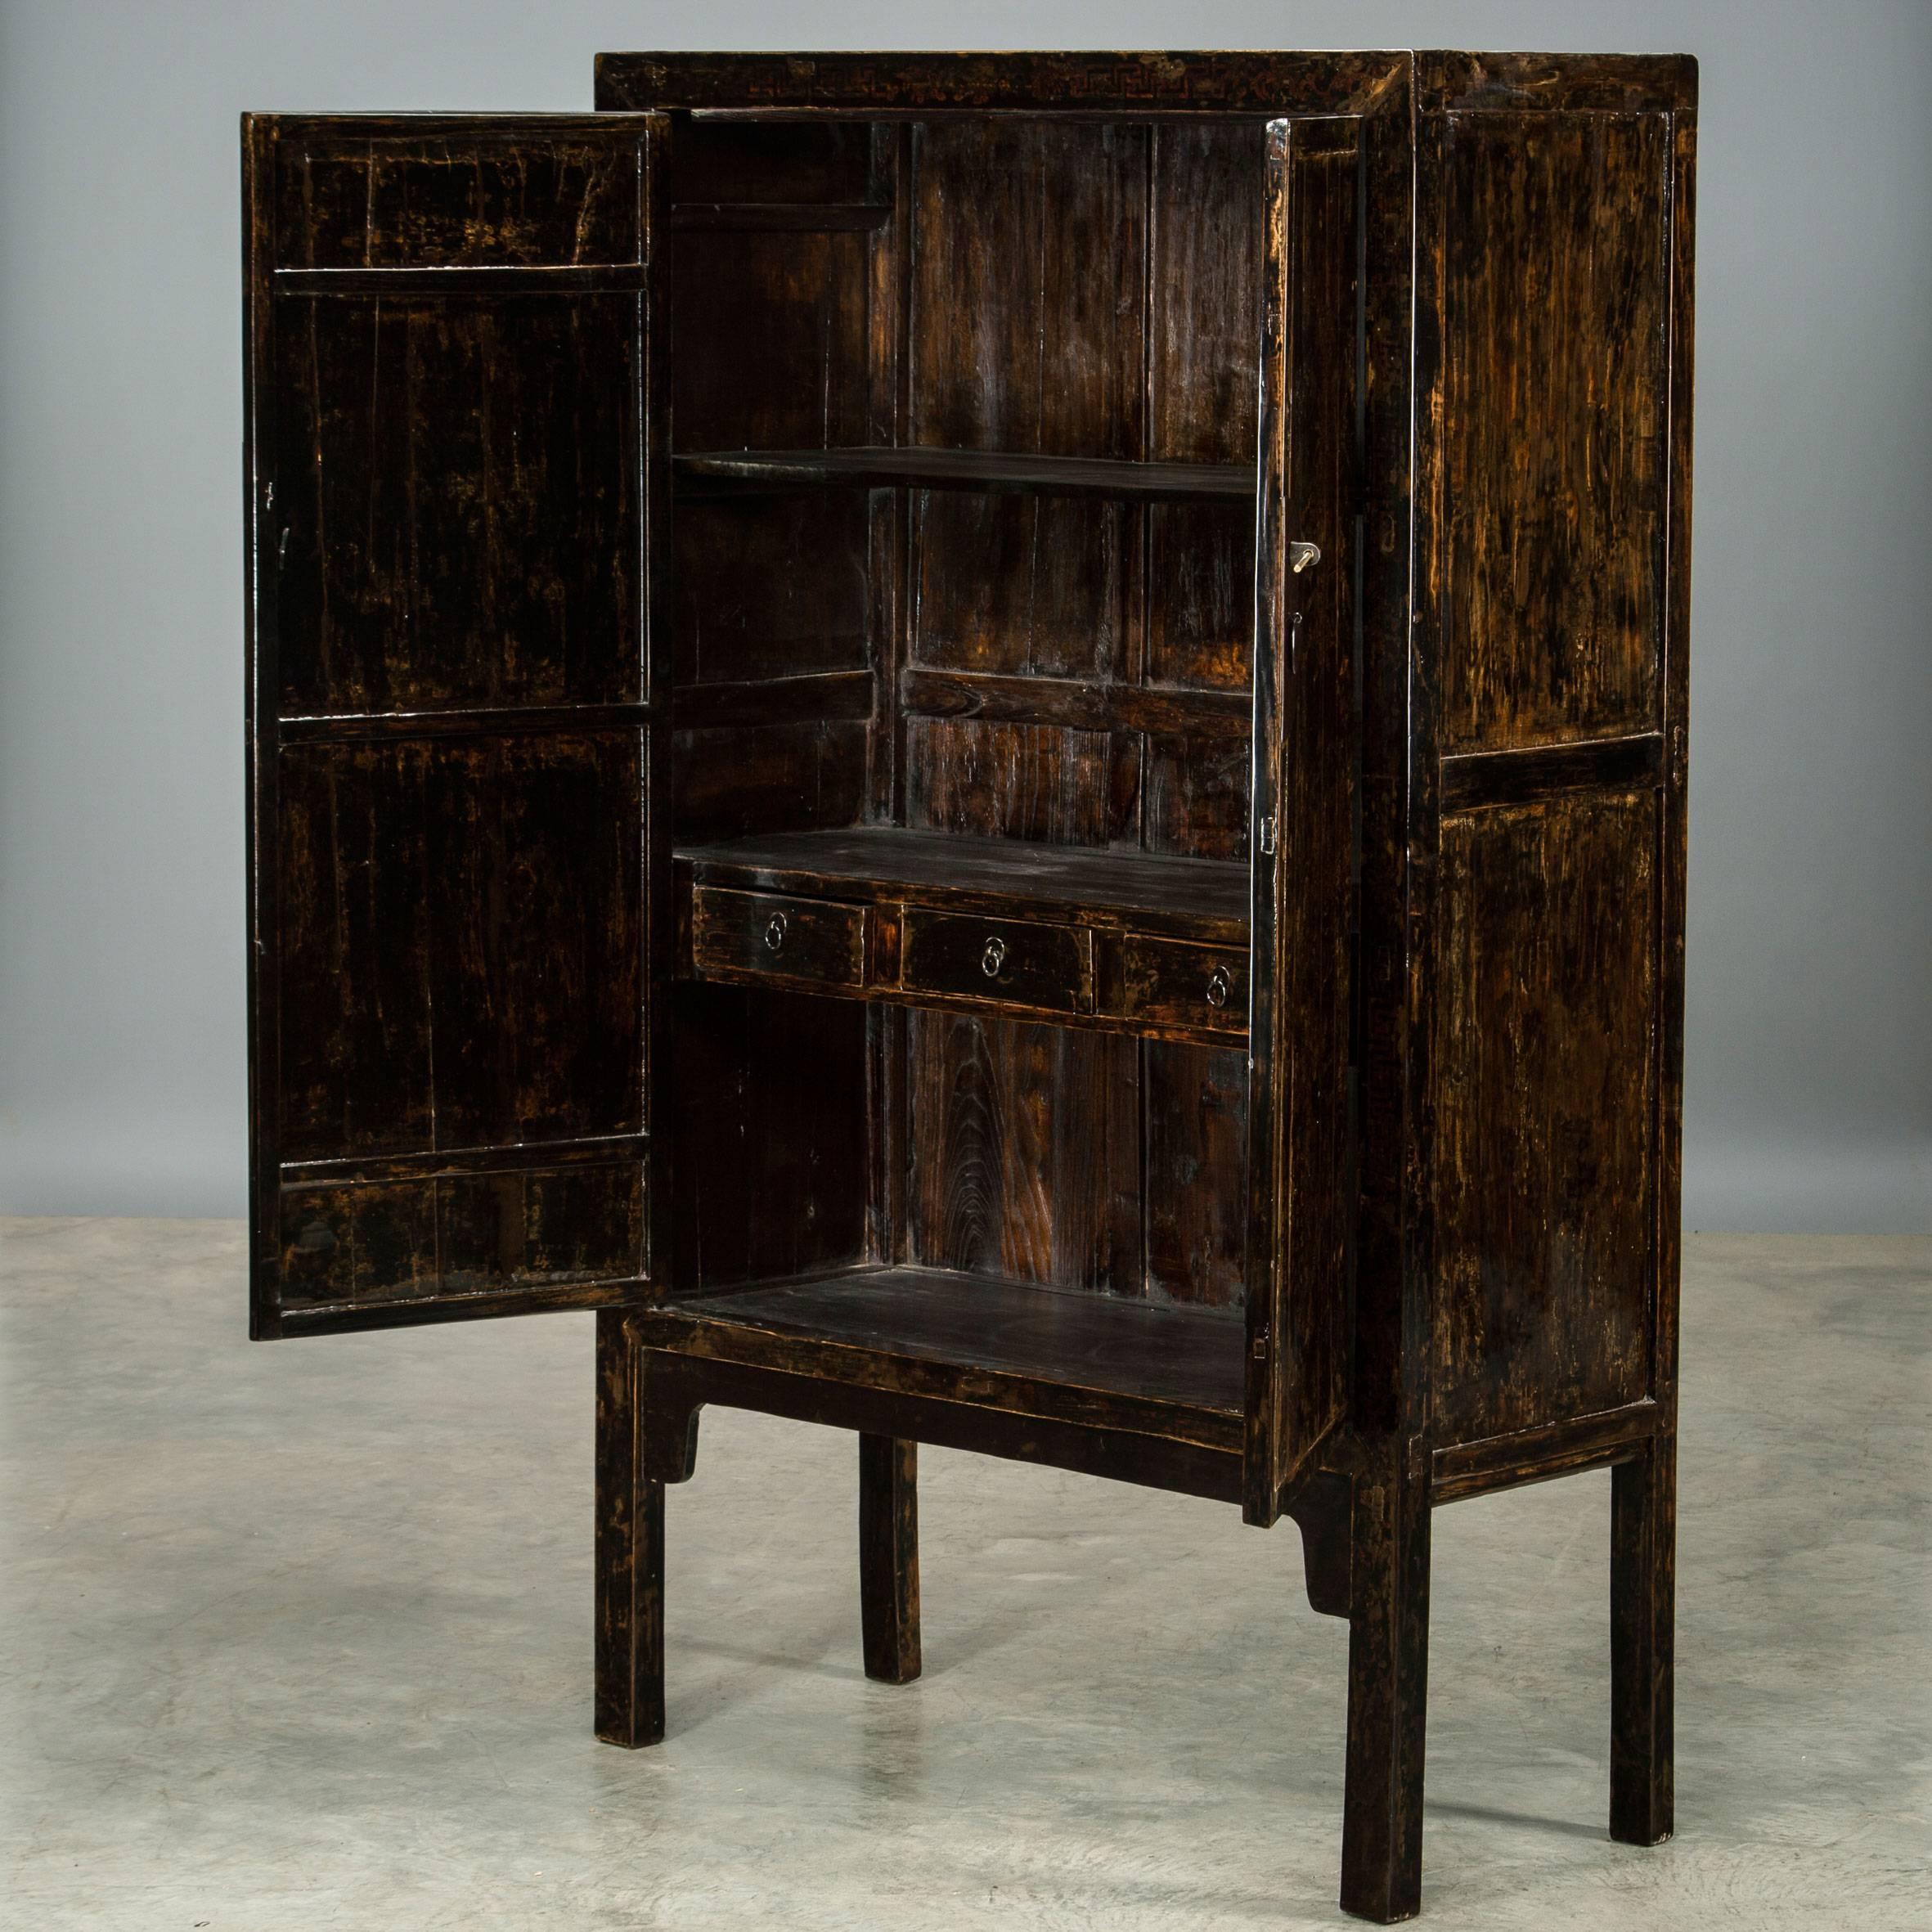 Black lacquer cabinet with traces of decorations, which time has given a beautiful natural original patina. Shanxi circa 1800.

Finish: Clear Chinese lacquer polishing, which enhances the natural patina.